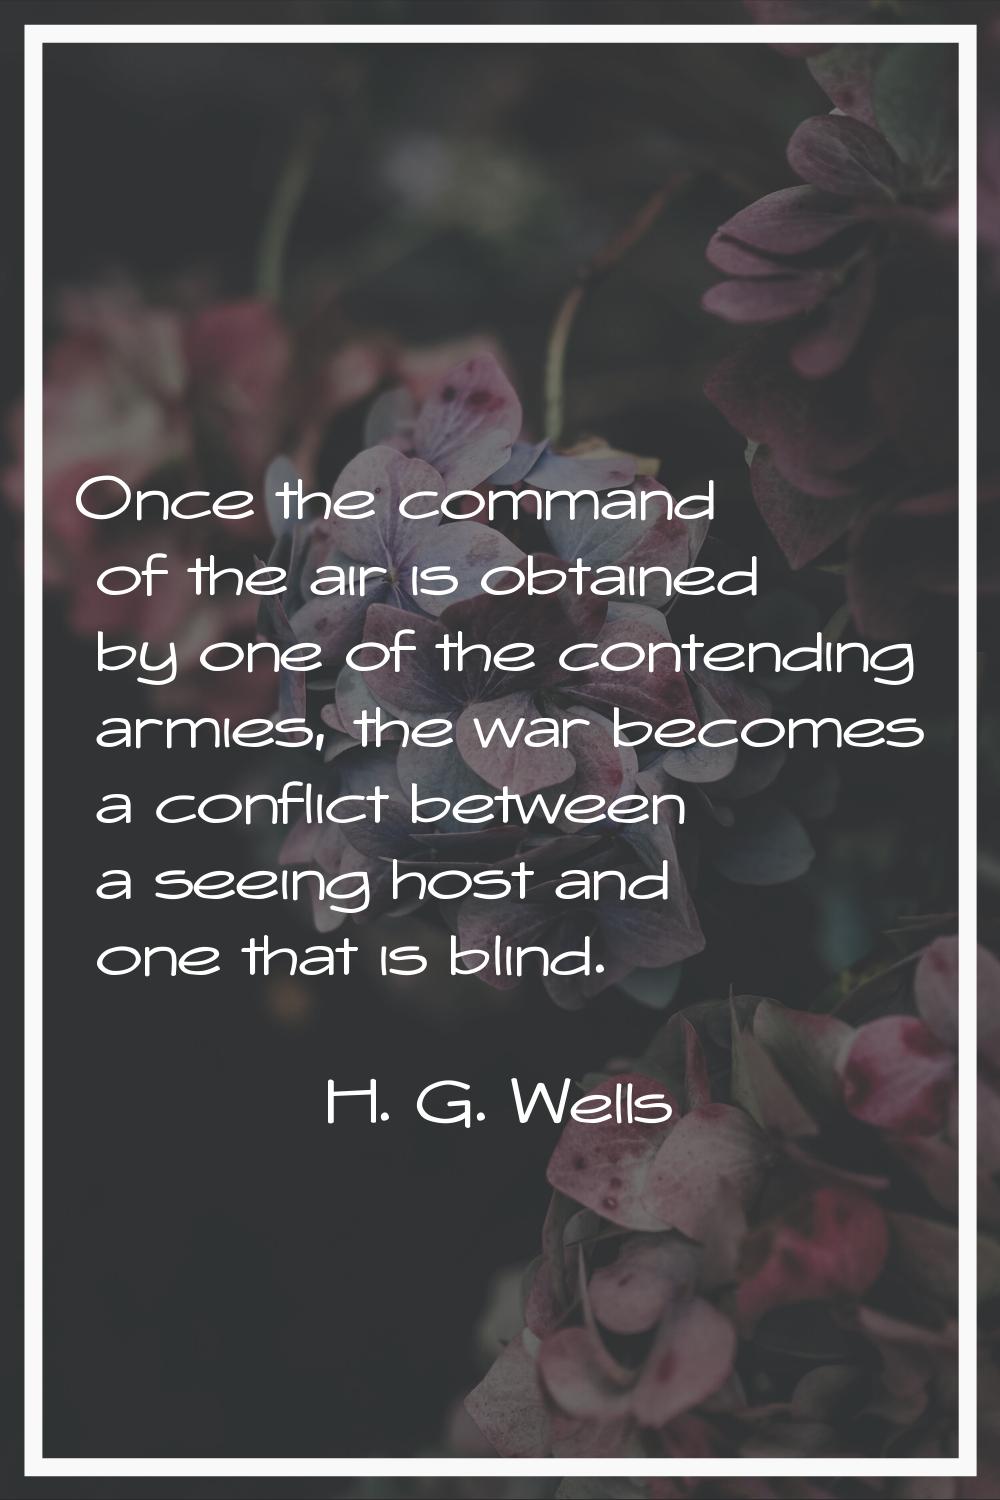 Once the command of the air is obtained by one of the contending armies, the war becomes a conflict